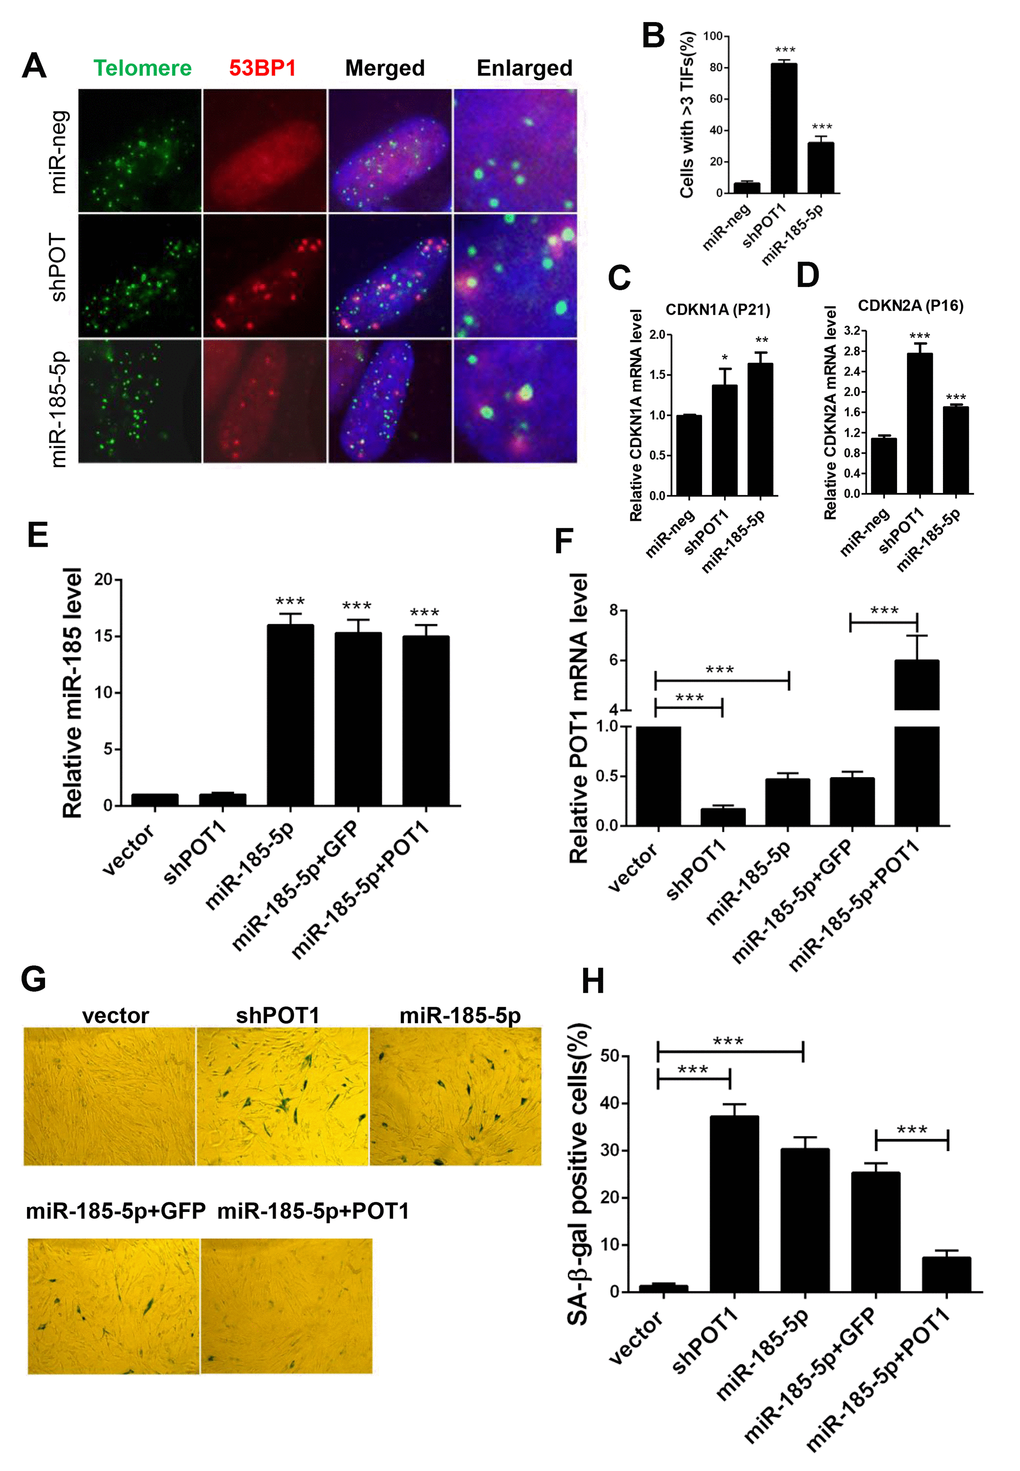 MiR-185 overexpression induces cellular senescence in primary human fibroblast cells. (A) Immunofluorescence and fluorescence in situ hybridization (IF-FISH) were performed in early passage HFF cells stably infected with viruses encoding empty vector (miR-Neg), shPOT1 or miR-185. (B) Quantification of the percentage of cells in (A) with more than 3 TIFs. (C) CDKN1A mRNA levels were detected by qRT-PCR. (D) CDKN2A mRNA level were detected by qRT-PCR. (E) HFF cells were stably infected with viruses encoding empty vector (miR-Neg), shPOT1, miR-185, miR-185 plus GFP, or mIR-185 plus POT1 respectively, miR-185 levels were detected by qRT-PCR. Relative levels of miR-185 were normalized using the U6 RNA. (F) POT1 mRNA levels were detected by qRT-PCR. Relative expression of the POT1 gene was normalized using GAPDH level. (G) HFF cells stably infected with viruses encoding empty vector (miR-Neg), shPOT1, miR-185, miR-185 plus GFP, or mIR-185 plus POT1 respectively, were stained for β-galactosidase activity (SA-β-gal). (H) Quantification of the percentage of cells in (G) positive for SA-β-gal staining. Error bars indicate standard deviations (n=3). P values were determined by Student’s t-test. ***P